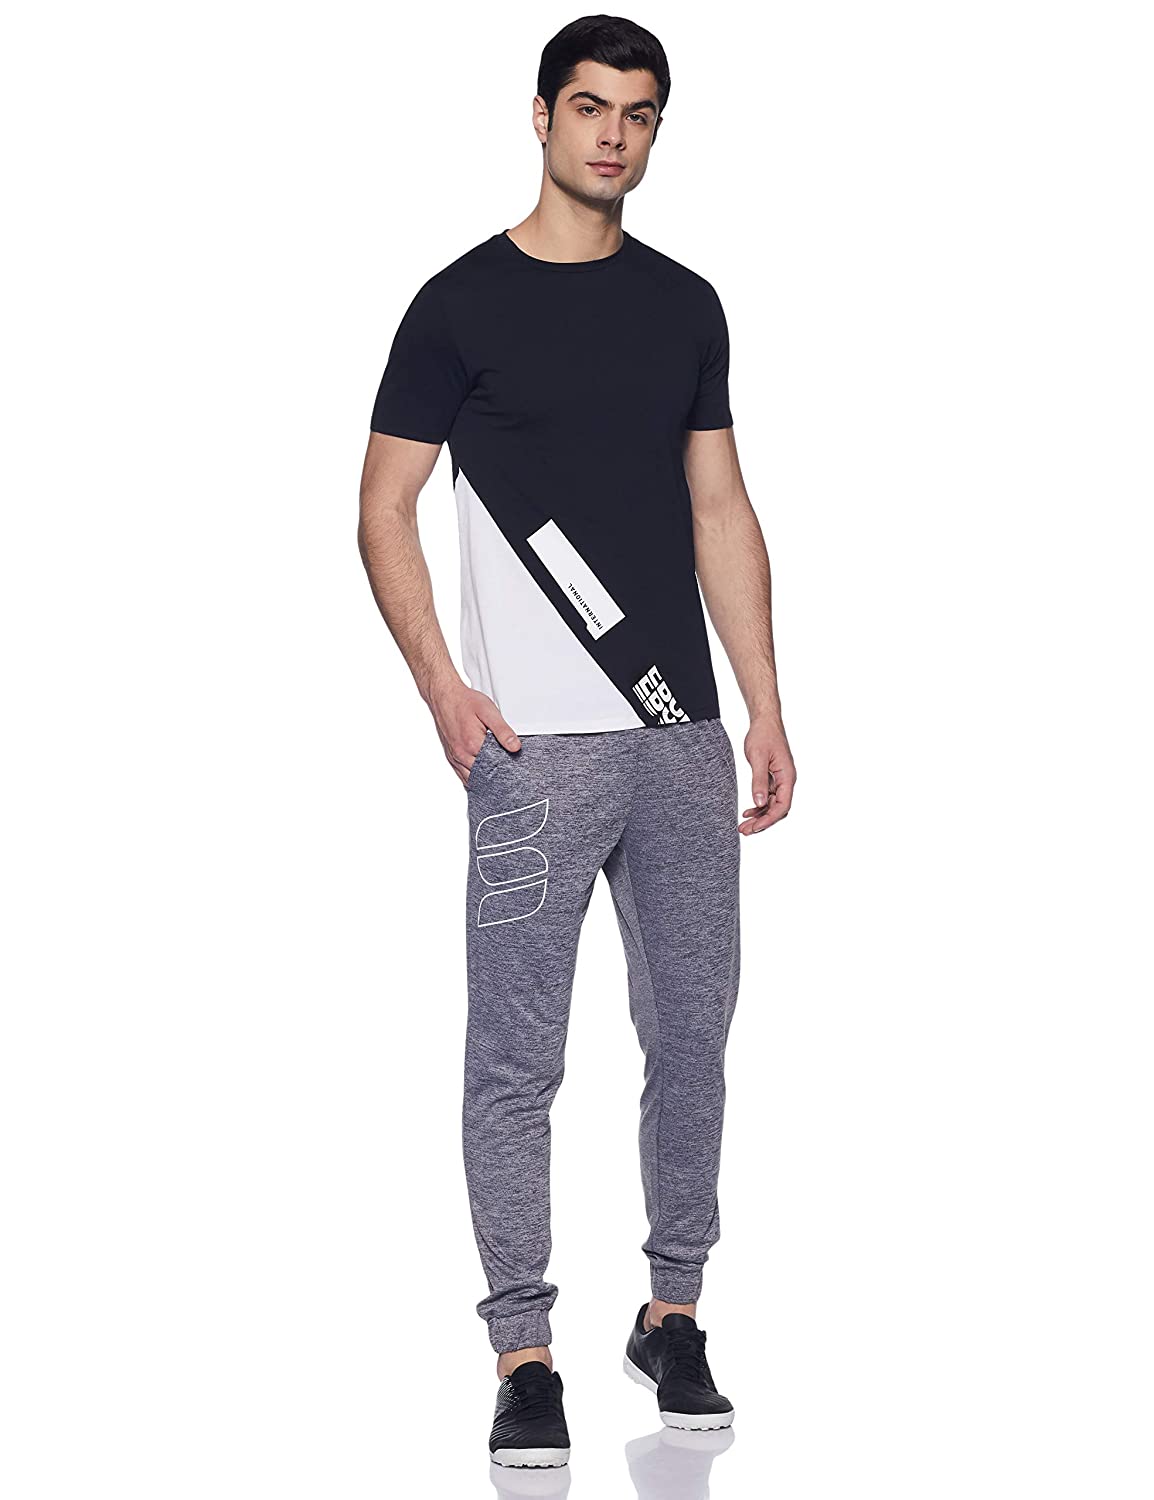 Top 25 Best Track Pants  Improve Your Mobility With Track Pants